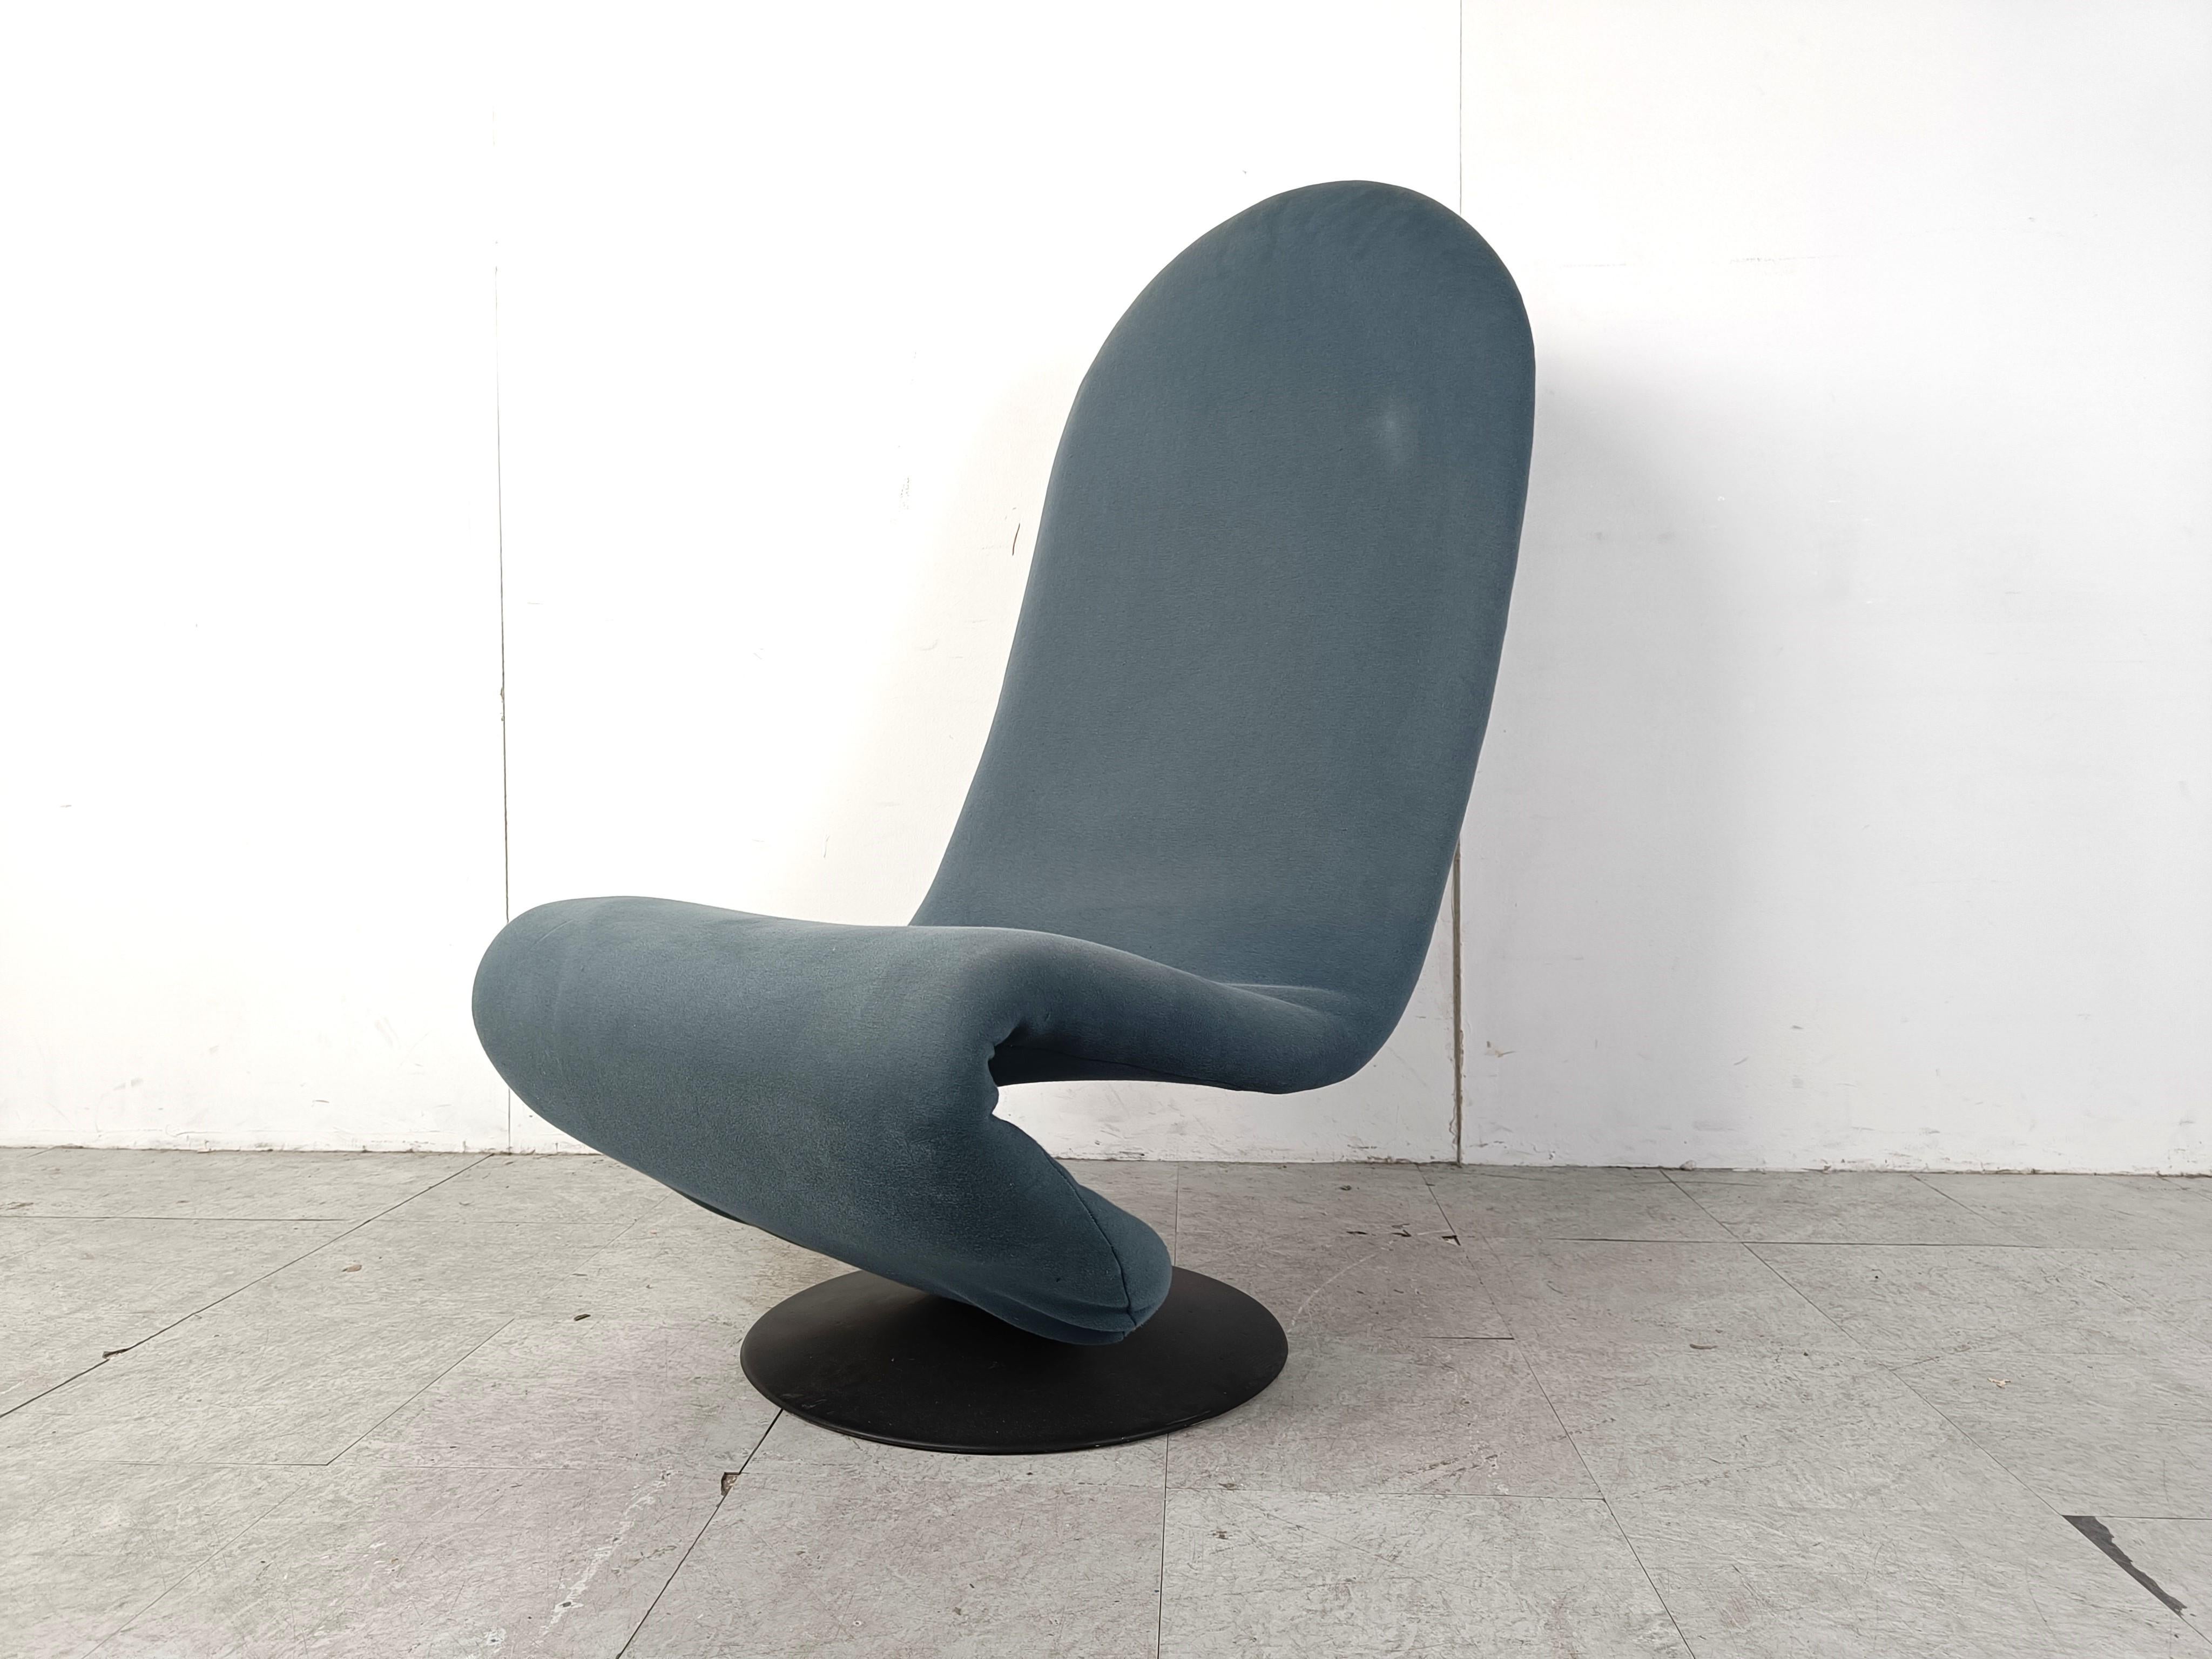 Late 20th Century 1-2-3 High Back Chair for Fritz Hansen by Verner Panton for Fritz Hansen, 1970s For Sale